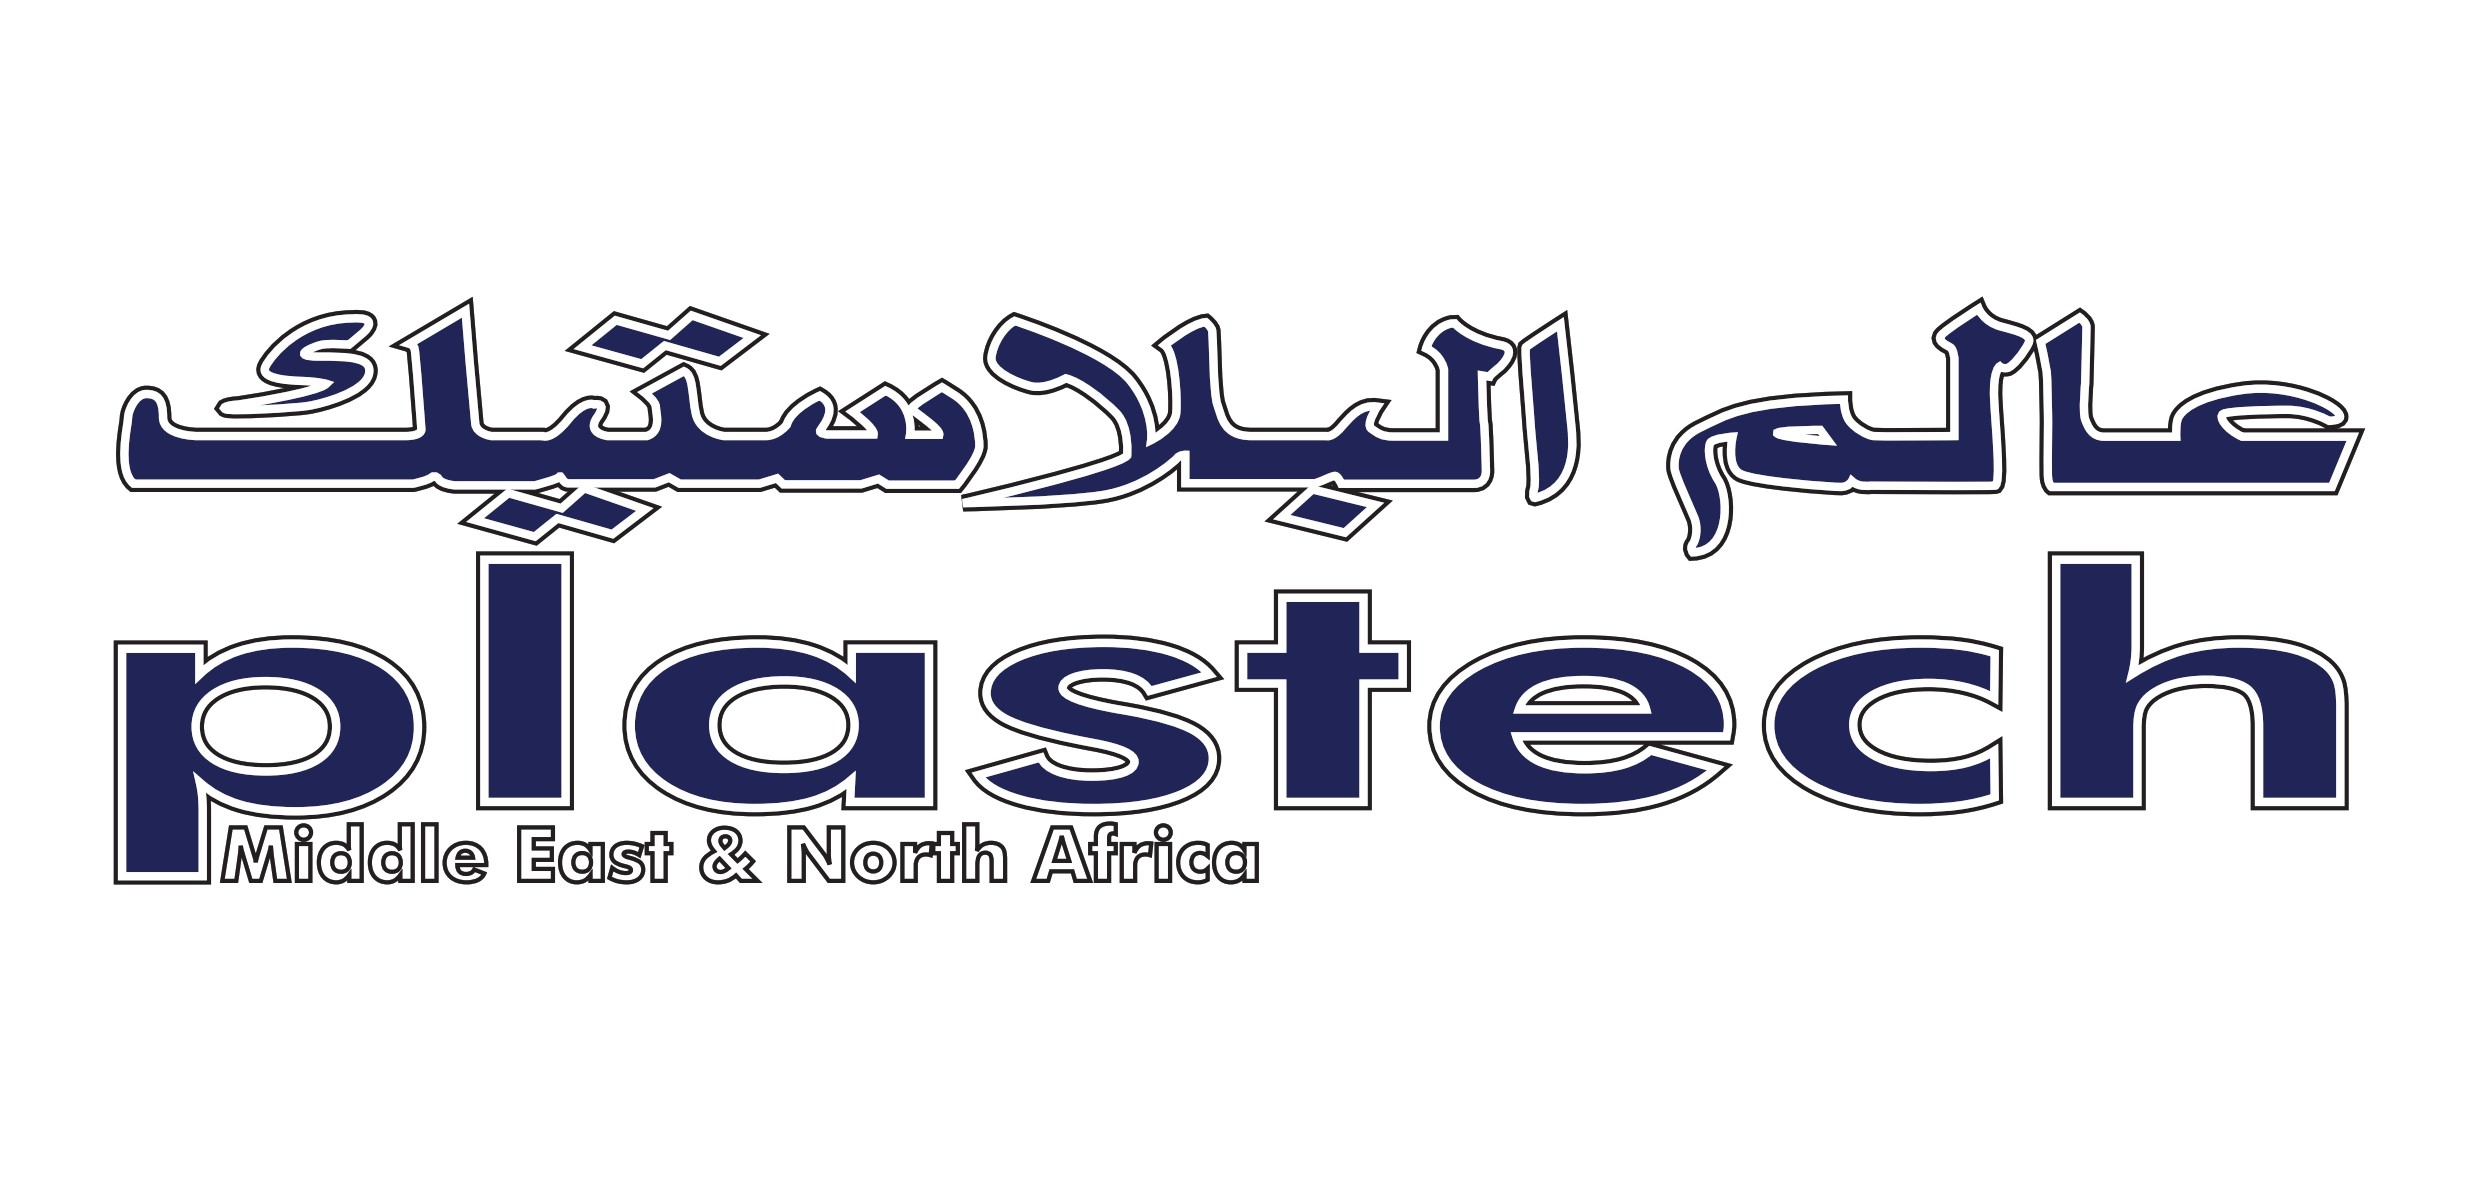 Plastech Middle East & North Africa 